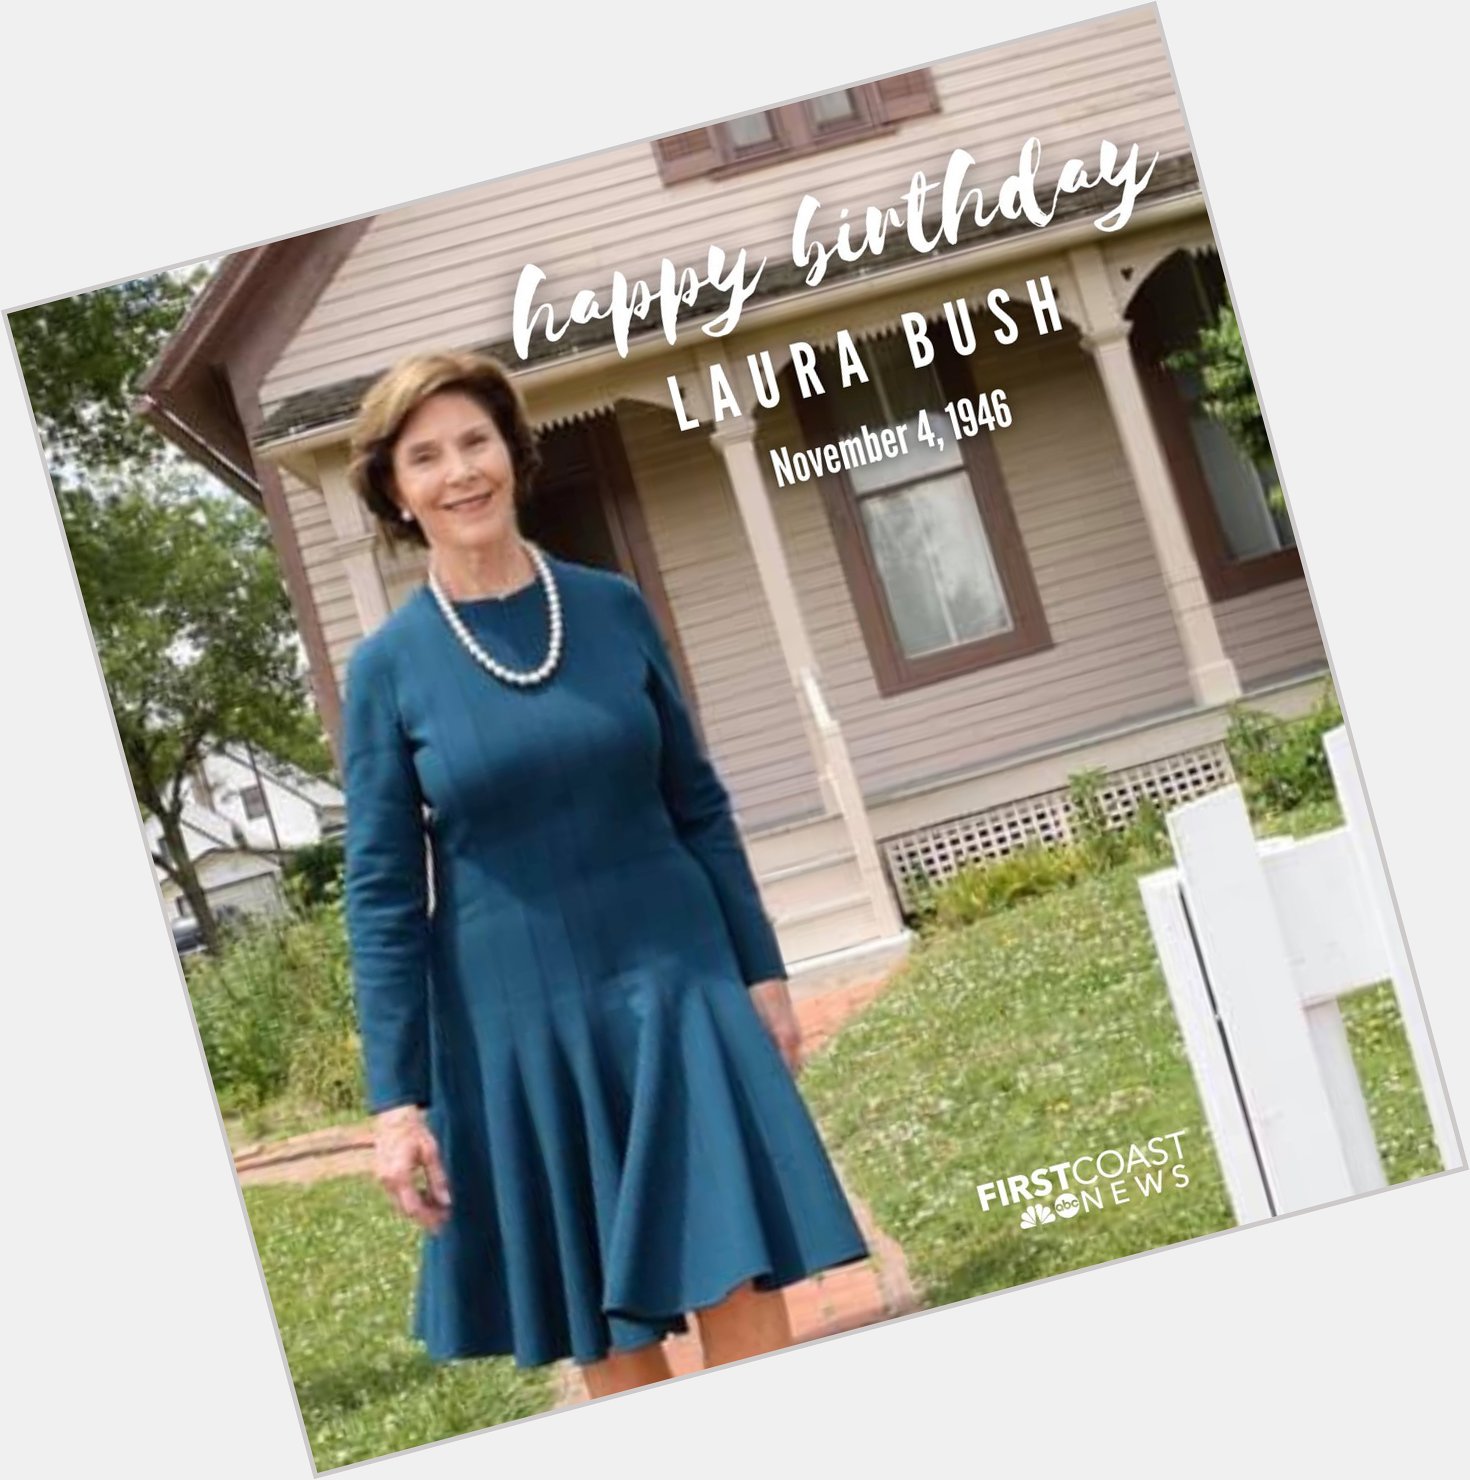 HAPPY BIRTHDAY! Today, former First Lady Laura Bush celebrates turning 74 years old. 